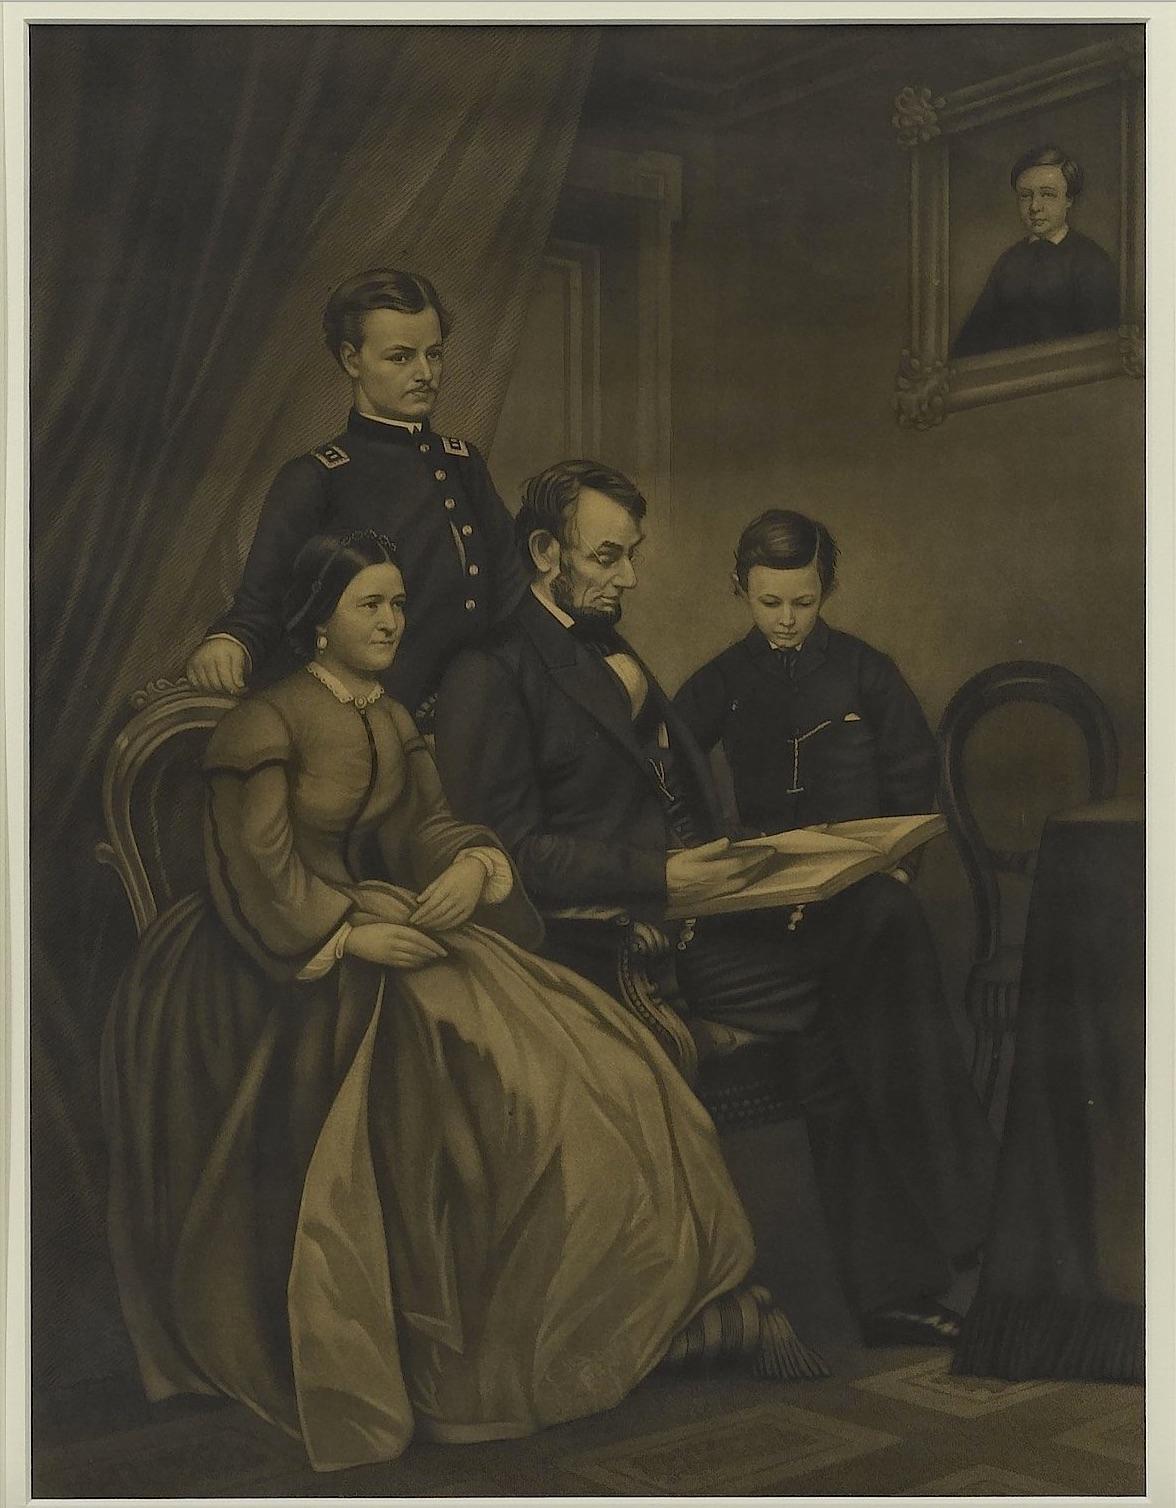 This 20th century reprint of the 1865 engraving Lincoln Family depicts President Lincoln and his family in April of 1865. The artist F. Schell painted the original work and John Dainty engraved it in the late 1865.

In the engraving, Abraham